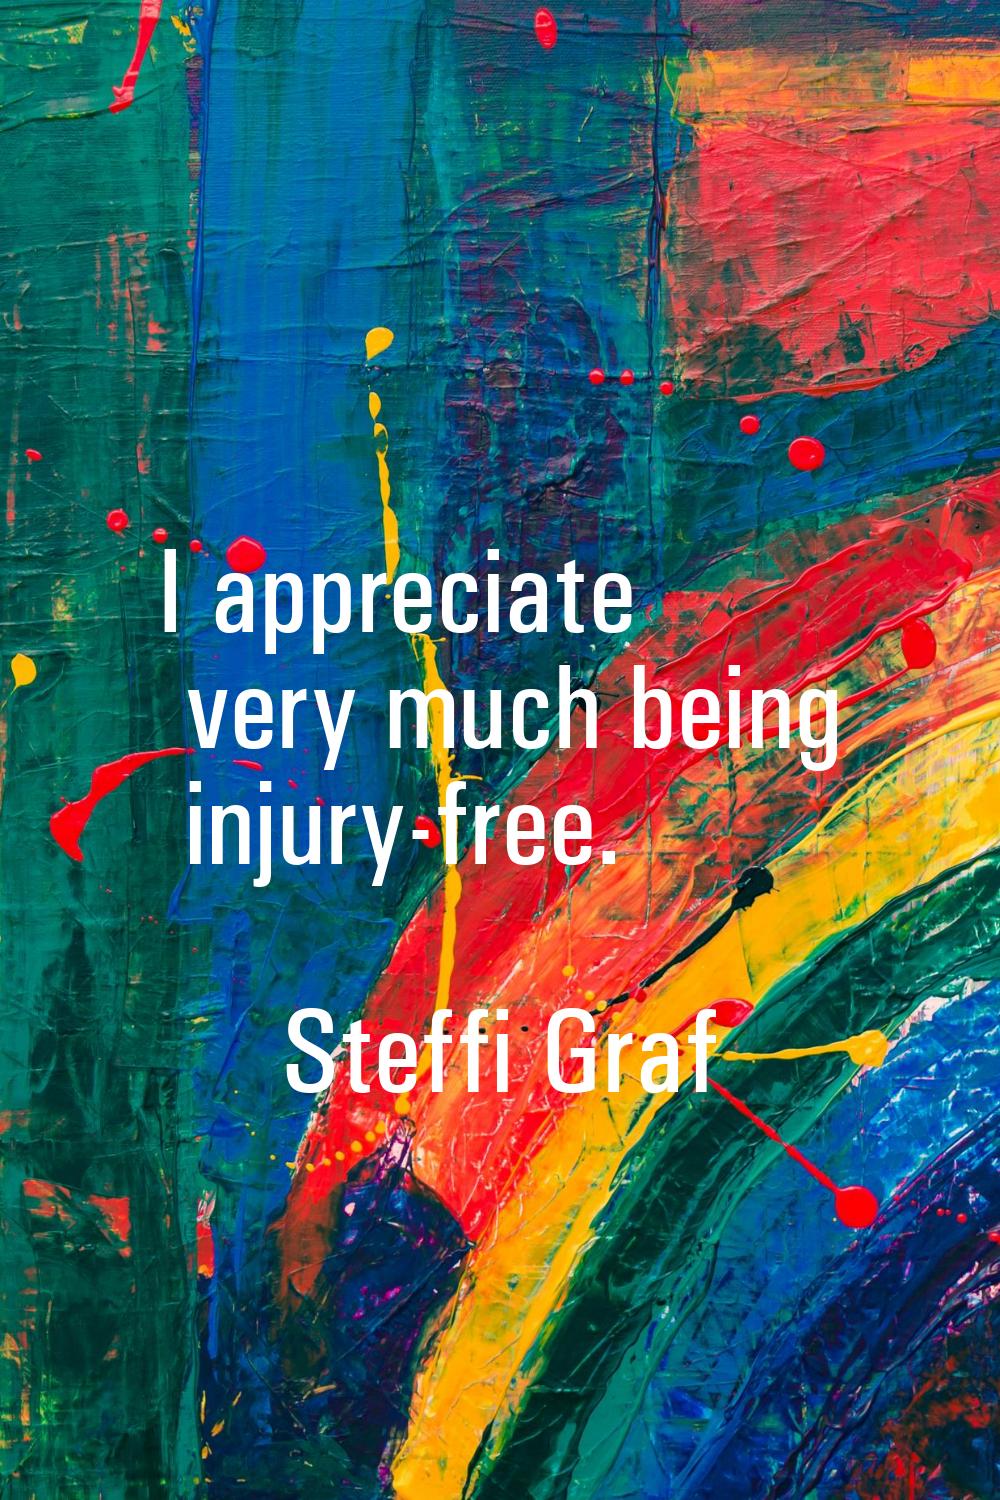 I appreciate very much being injury-free.